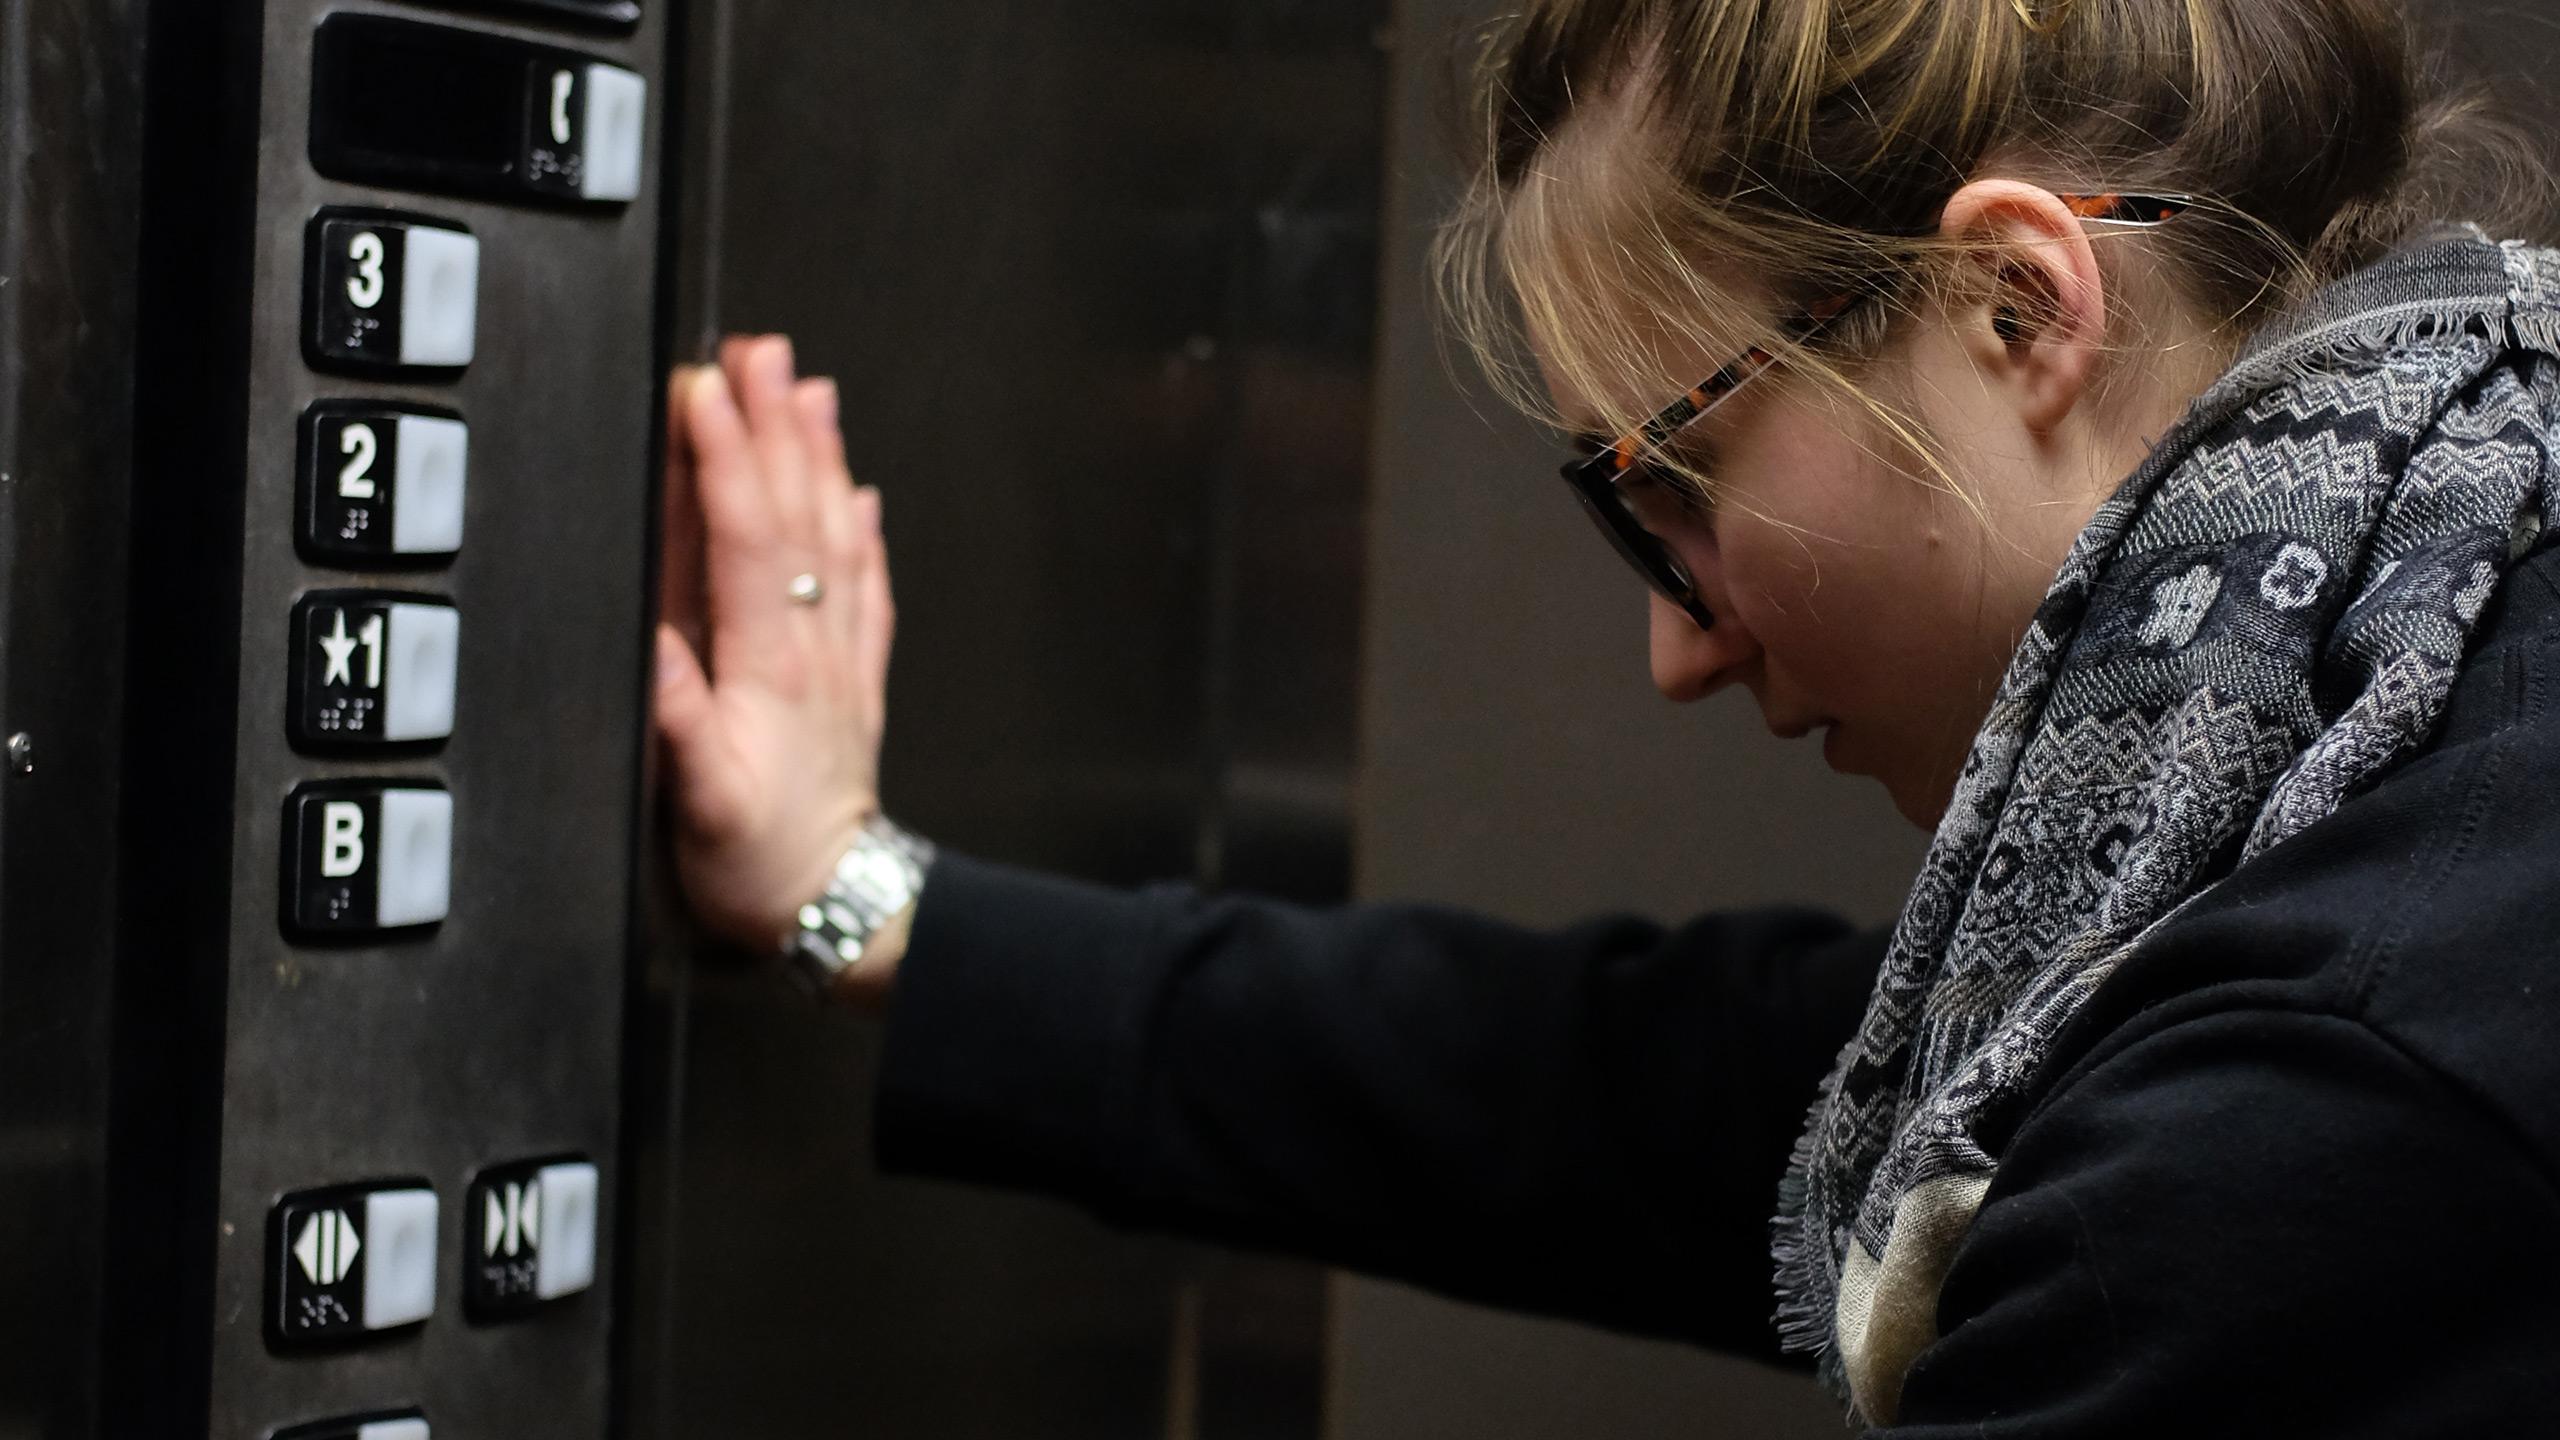 A student stands with their hand pressed against the side of an elevator, looking sadly at the buttons.